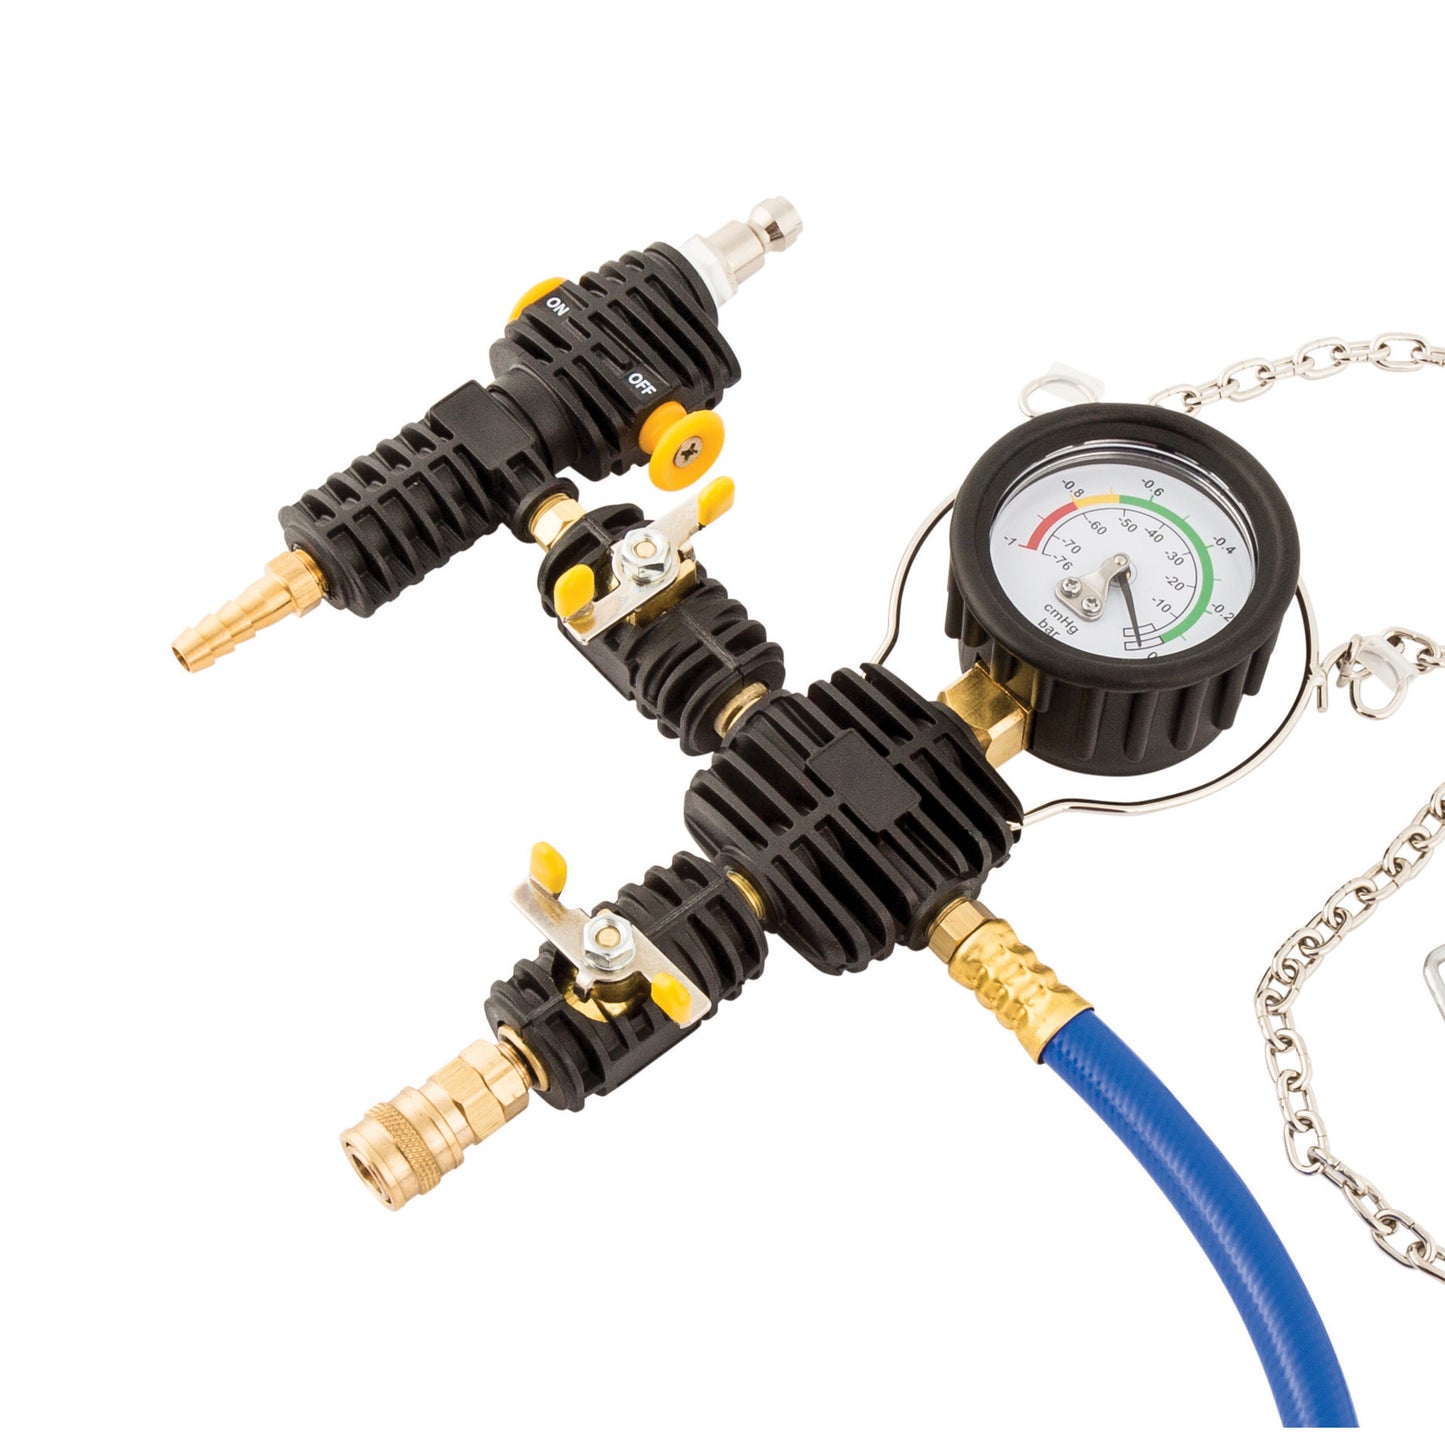 Replacement Pressure Pump and Hose Assembly for STEELMAN Cooling System Test and Purge Kit